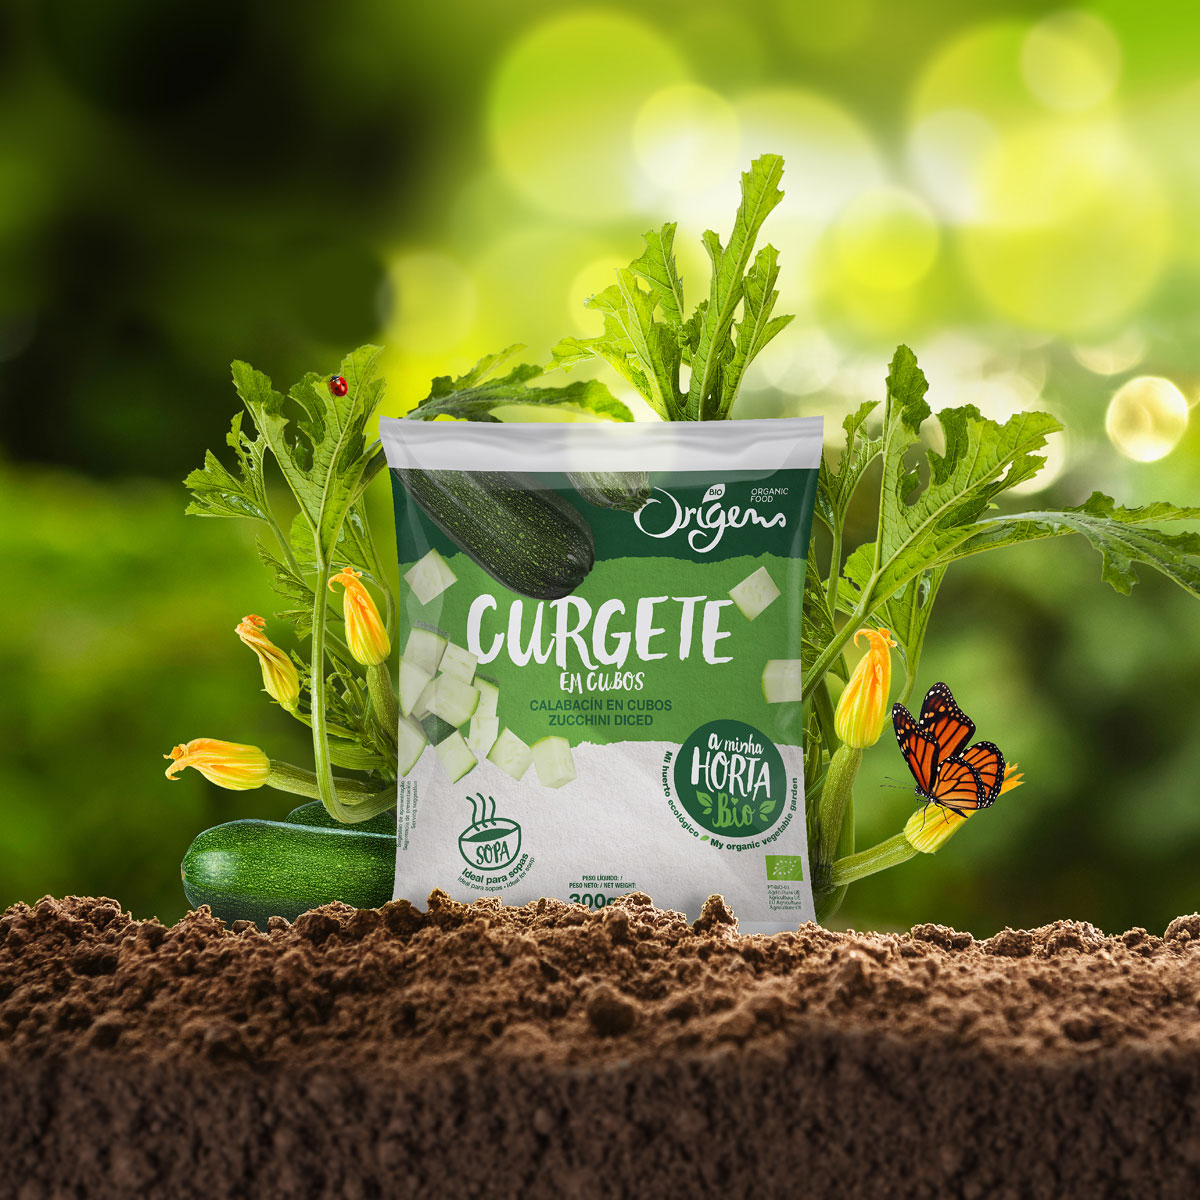 My Organic Vegetable Garden Origens Bio Brand and Packaging Design by Equanto